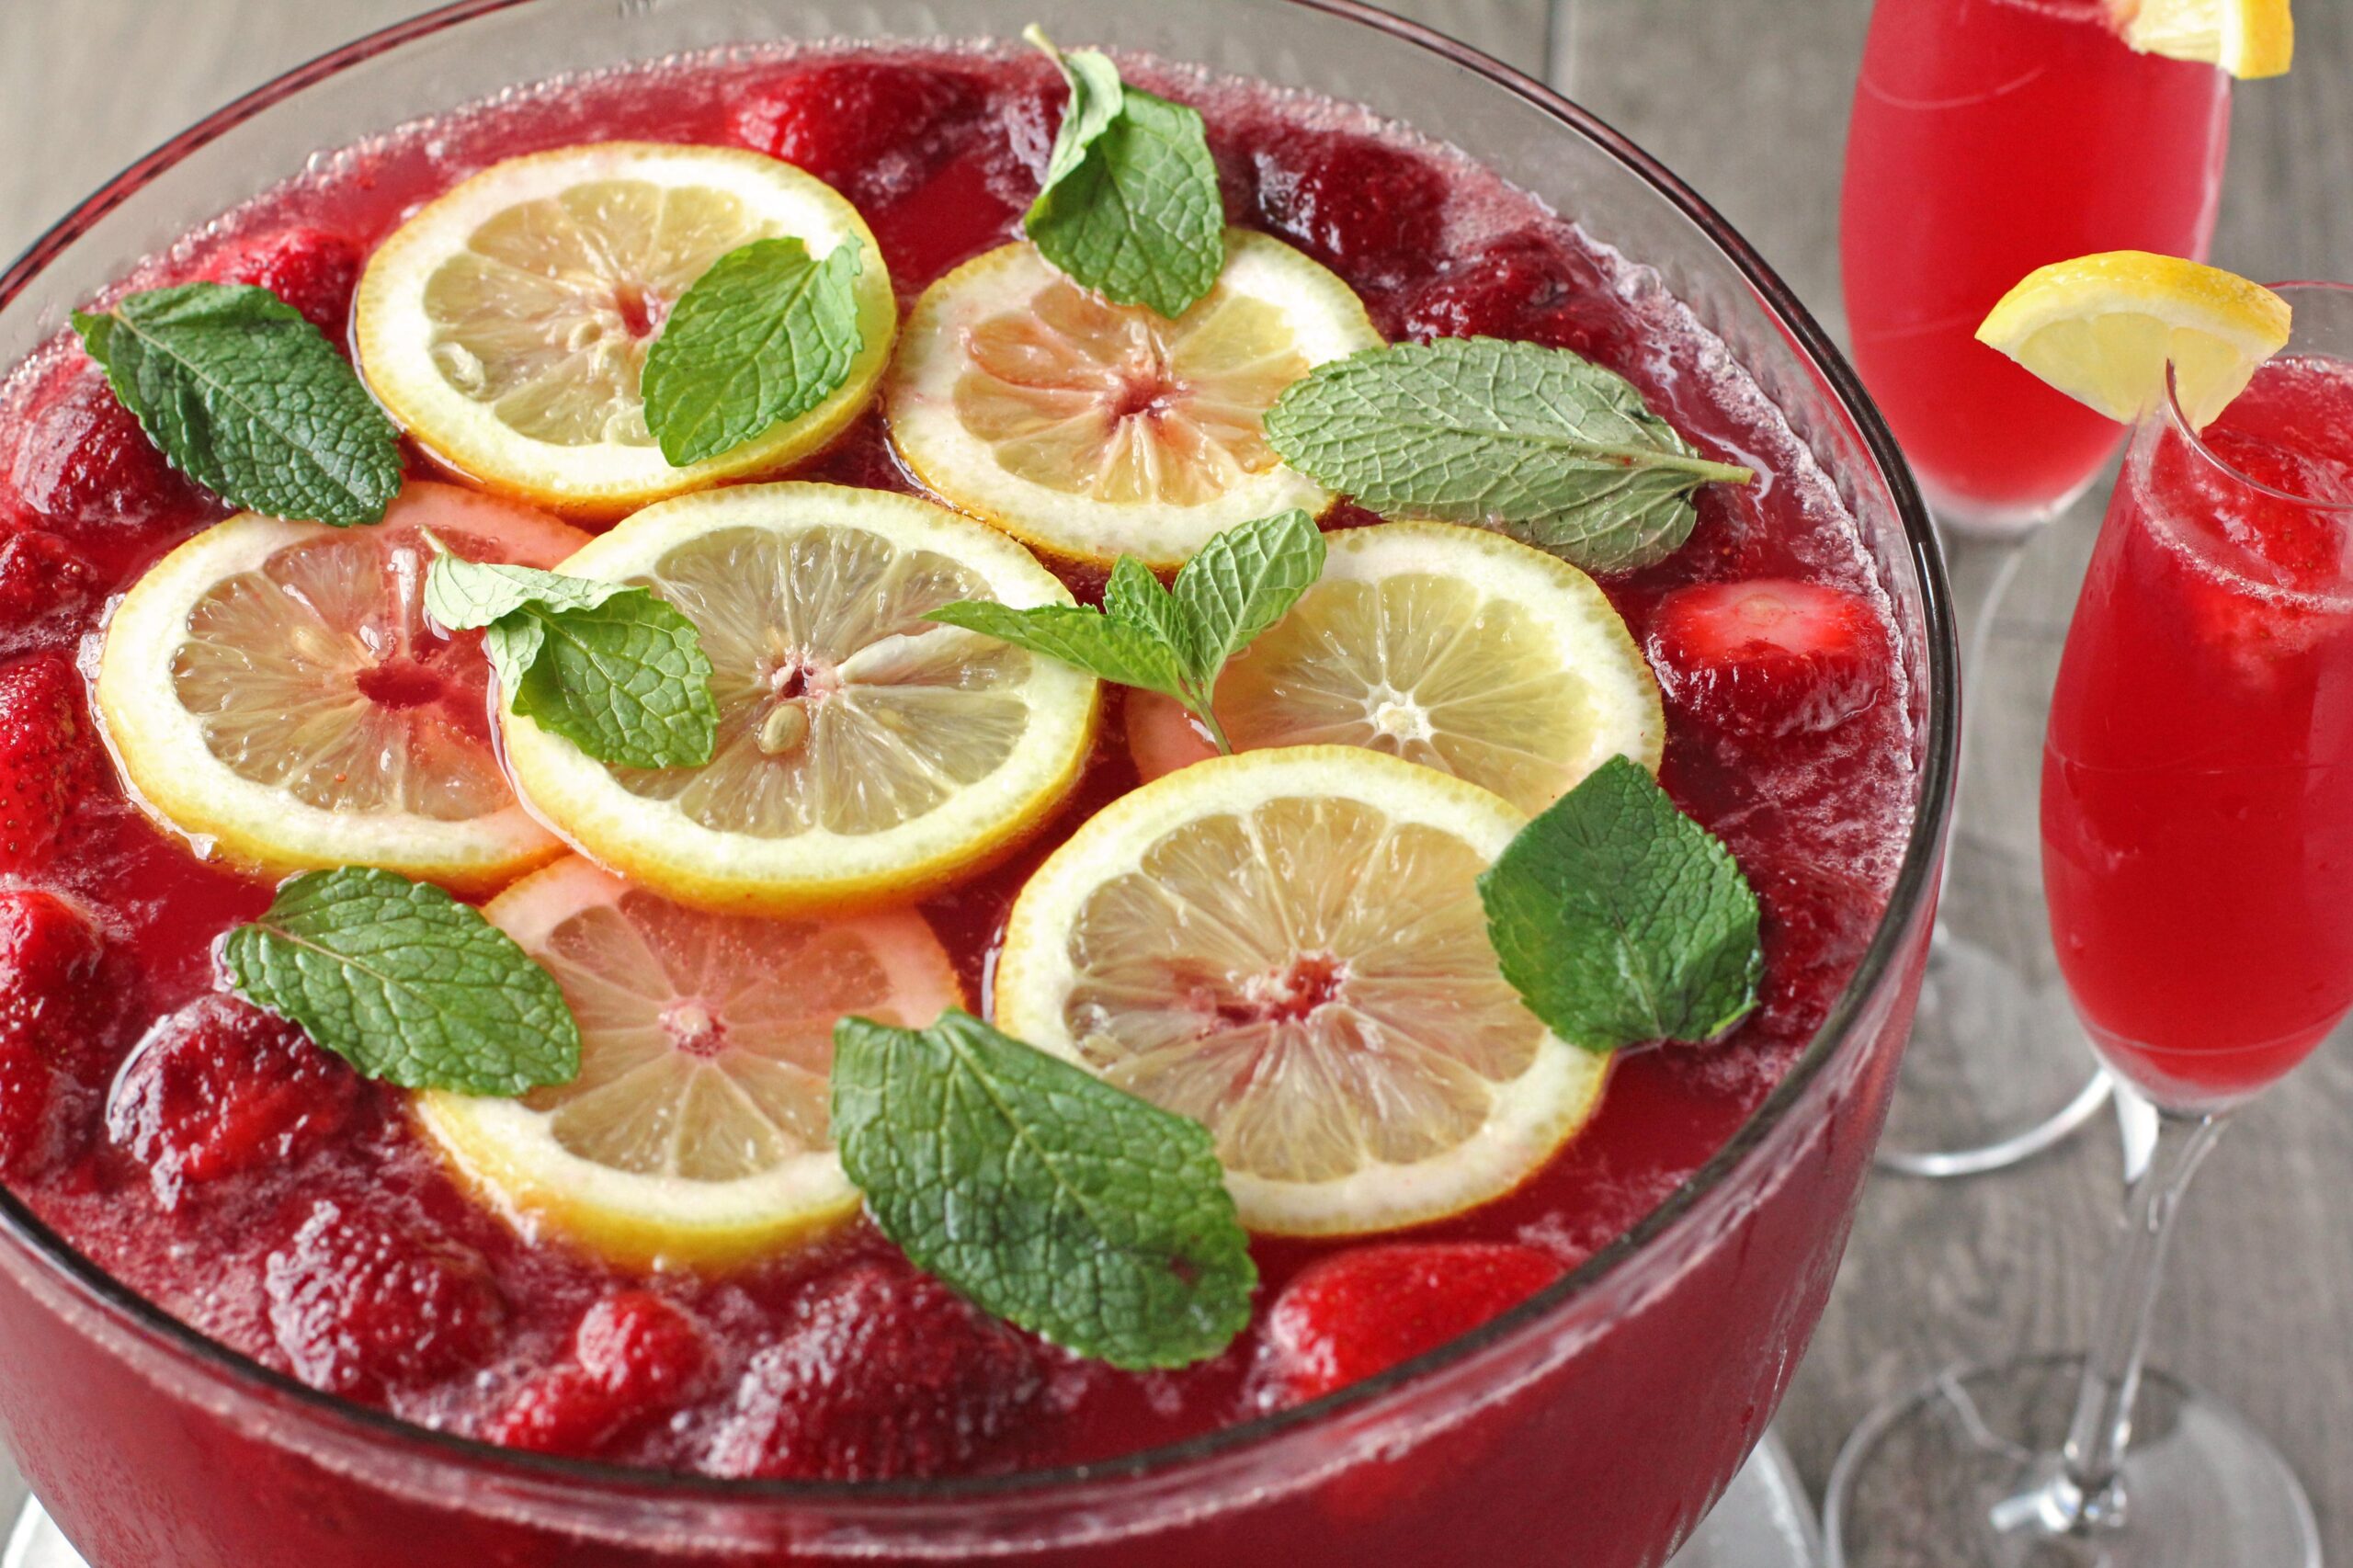  Sip on this delightful punch that's perfect for any party.